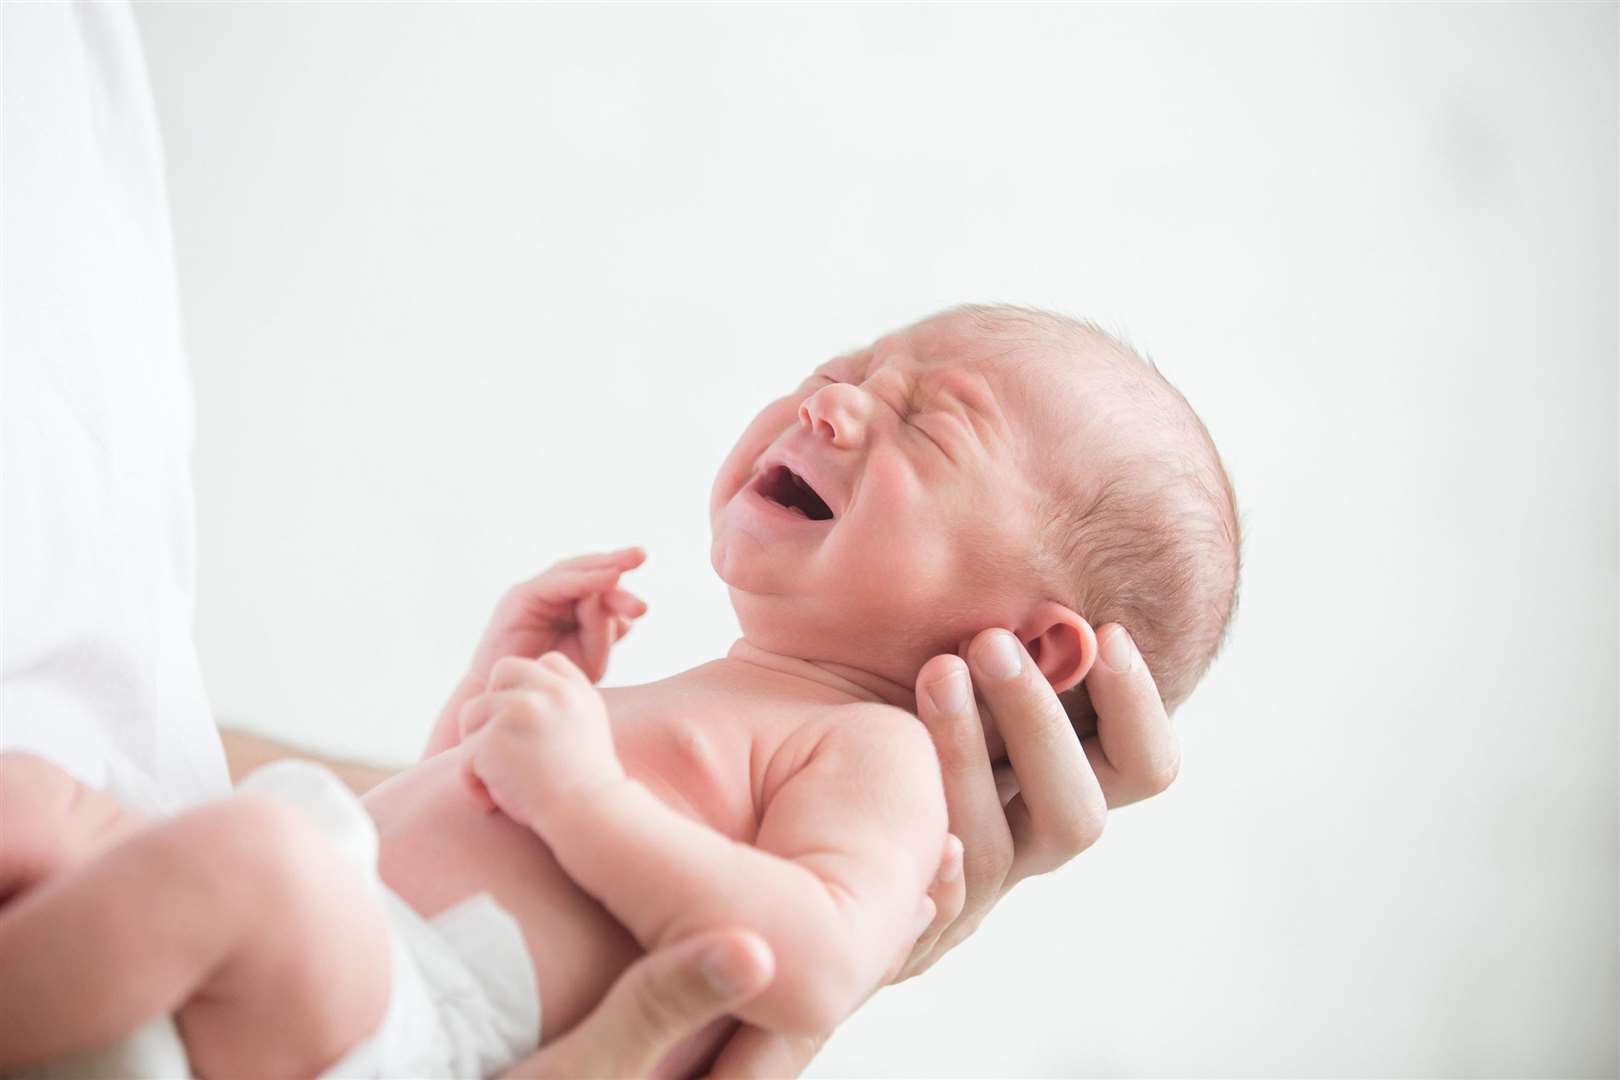 Colic can take its strain on new parents